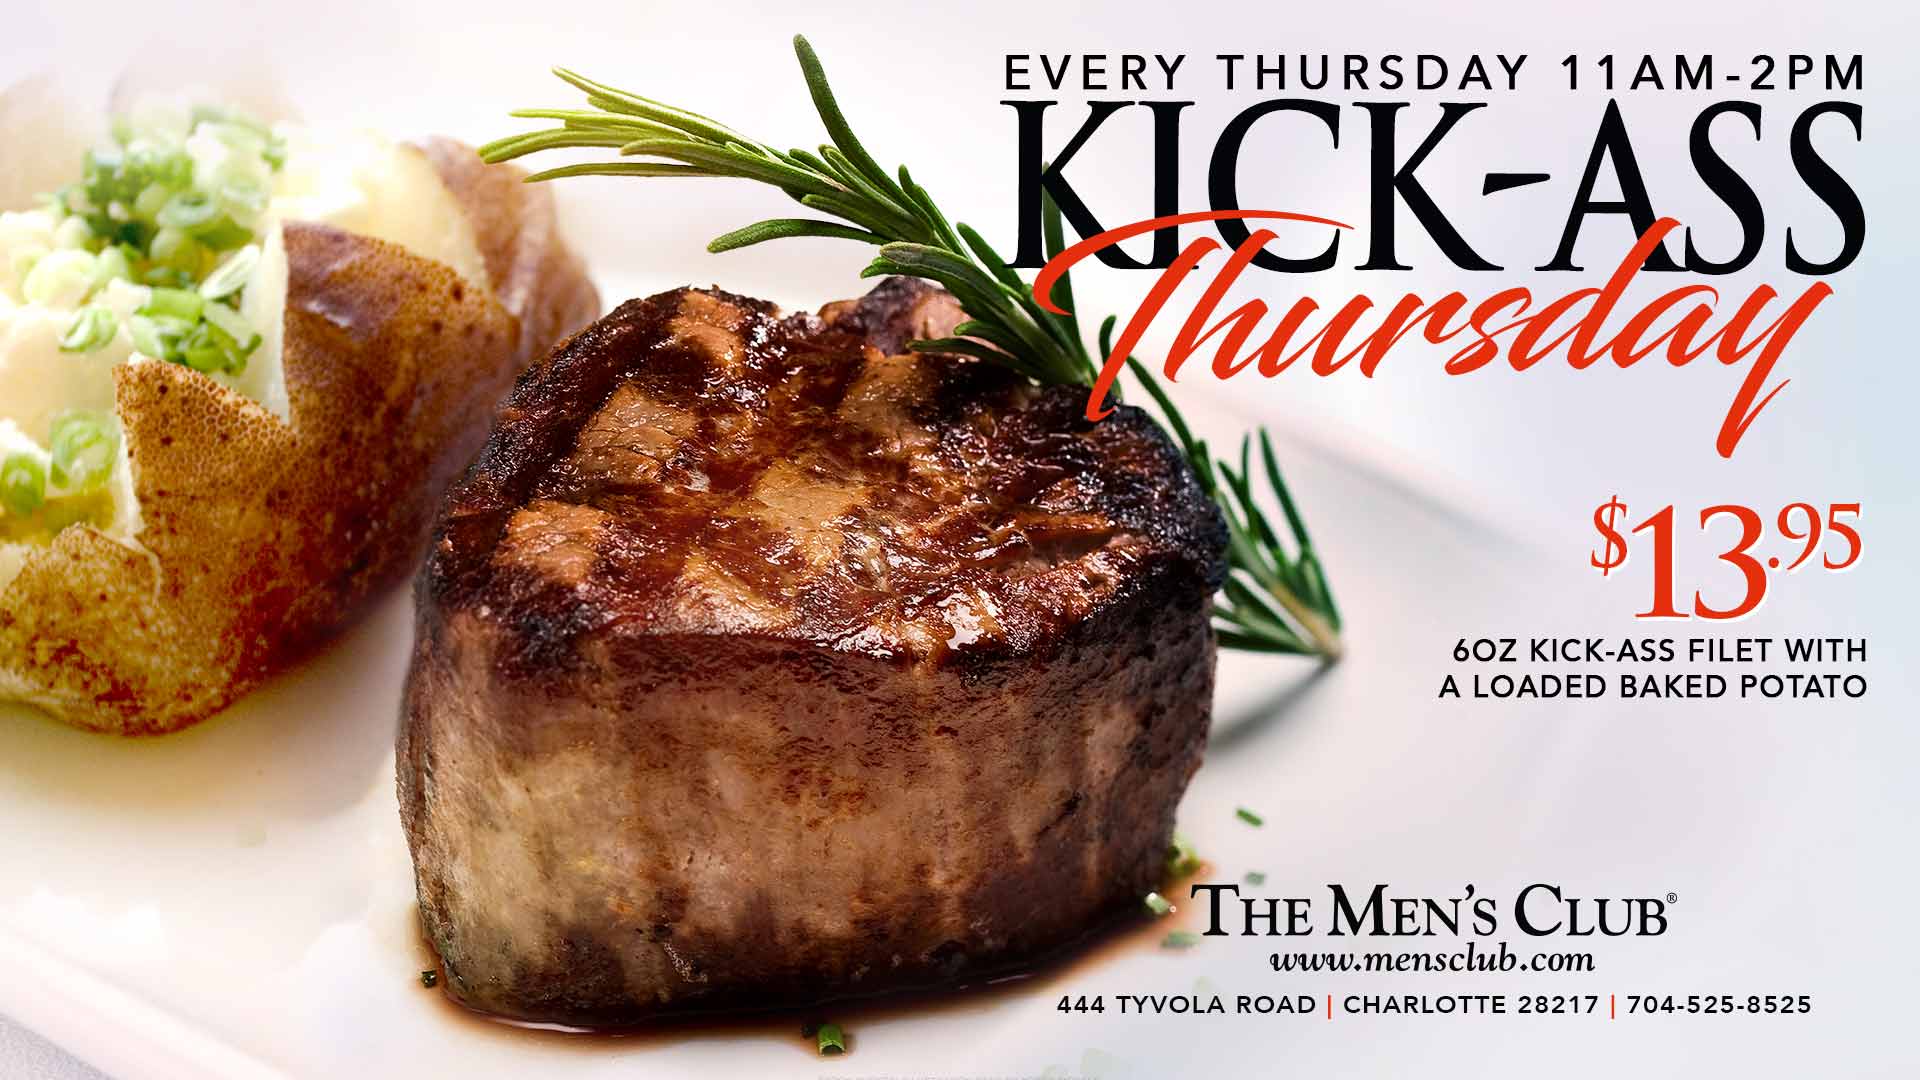 image of savory 6oz kick-ass filet with a loaded baked potato for only $13.95 at The Men's Club of Charlotte